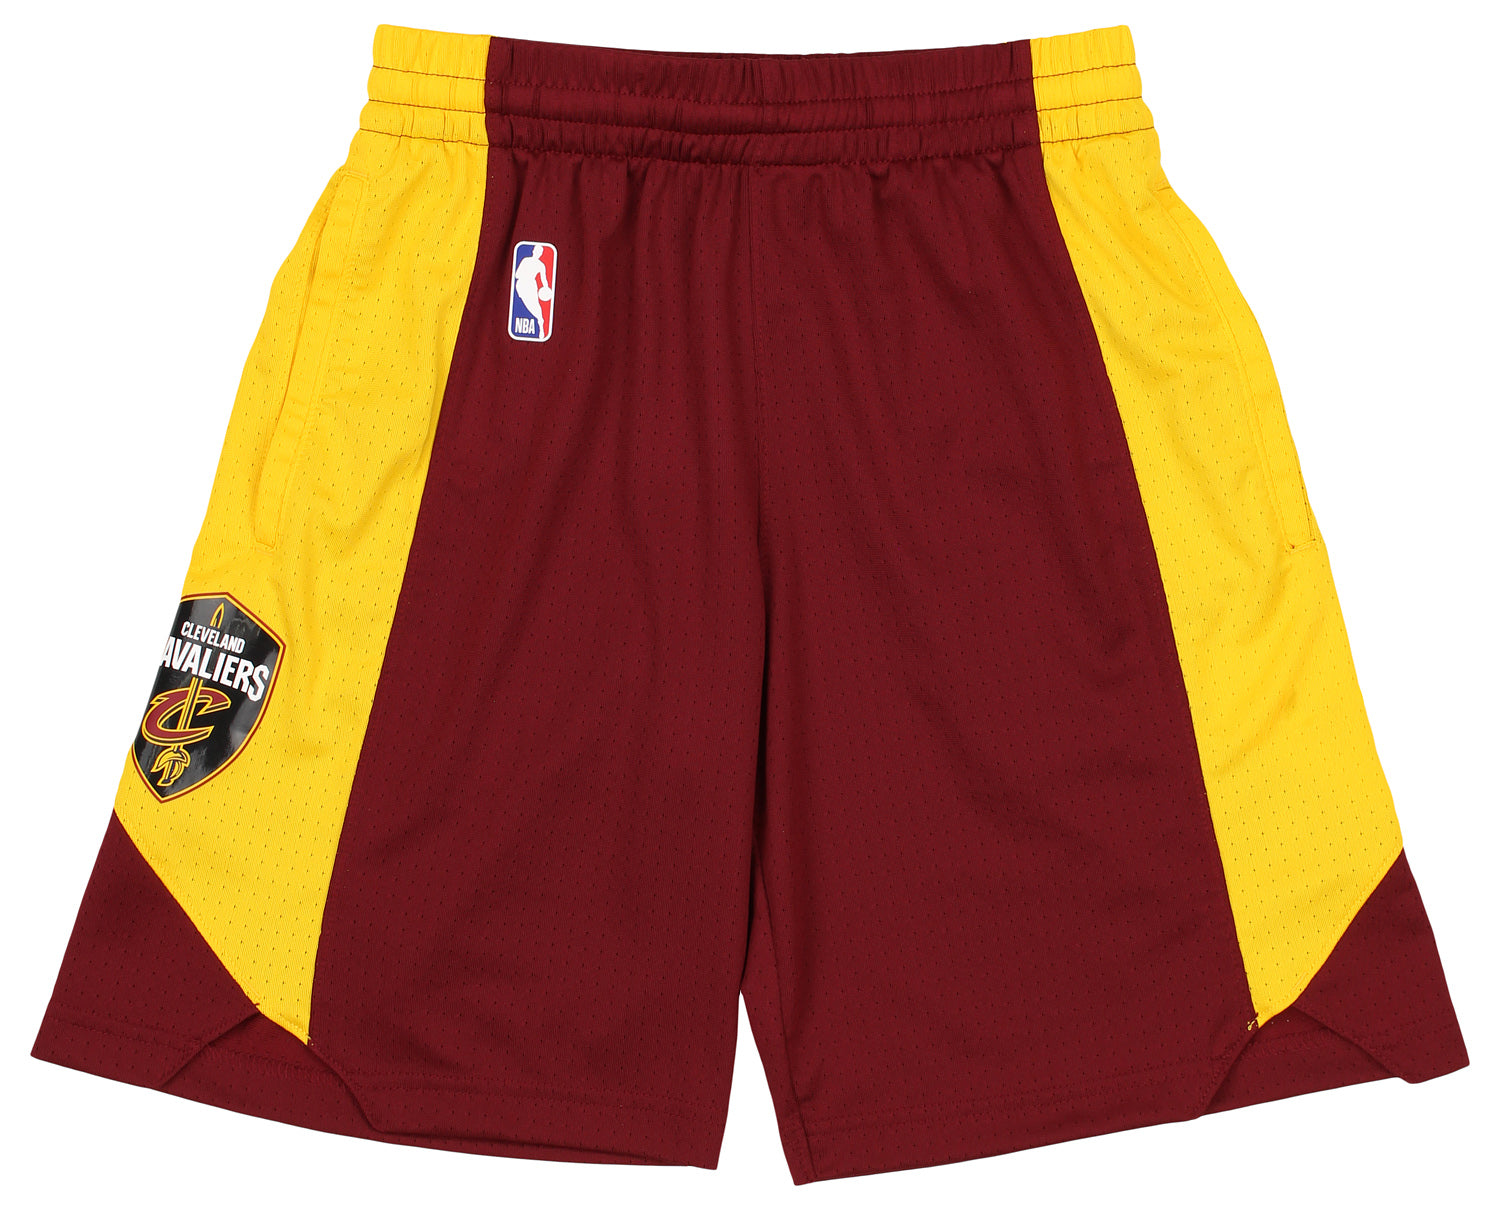  Outerstuff Cleveland Cavaliers Youth Size Primary Team